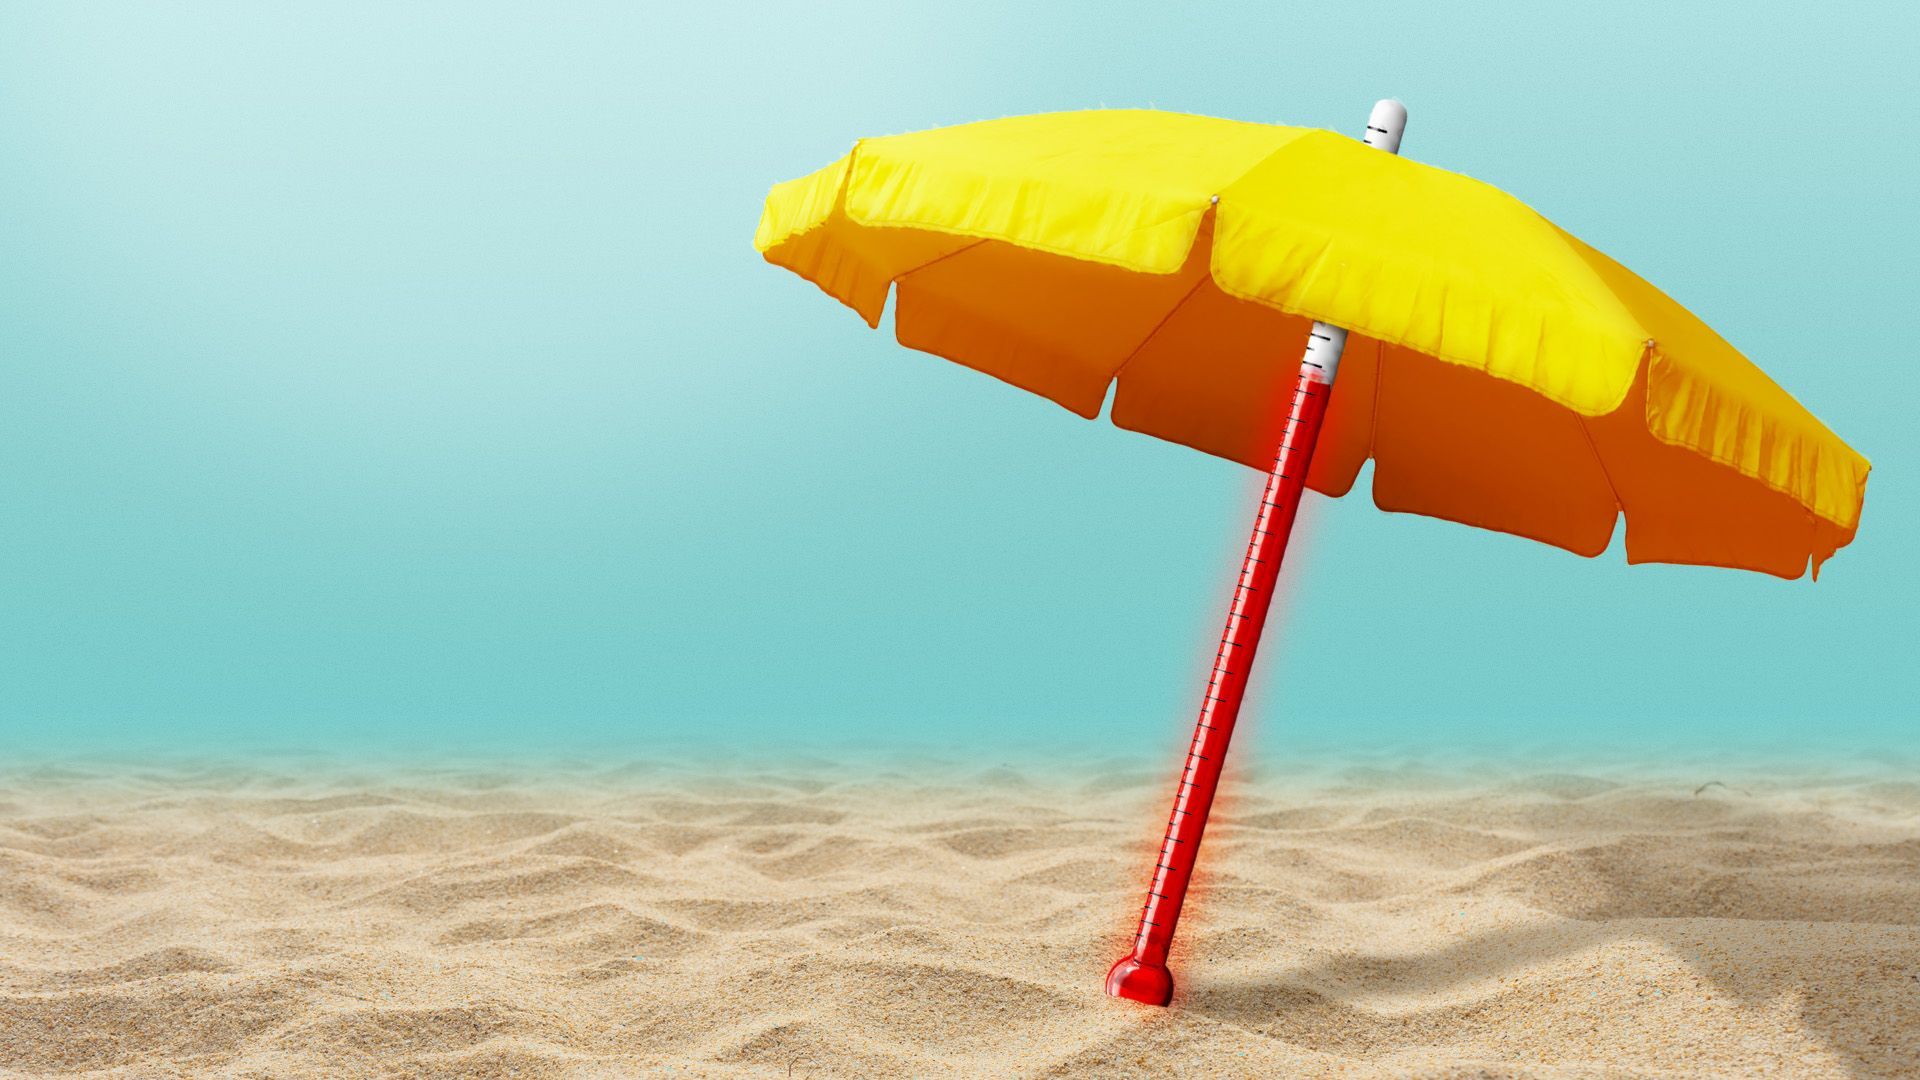 Illustration of a beach umbrella with a thermometer for the base on a hot beach